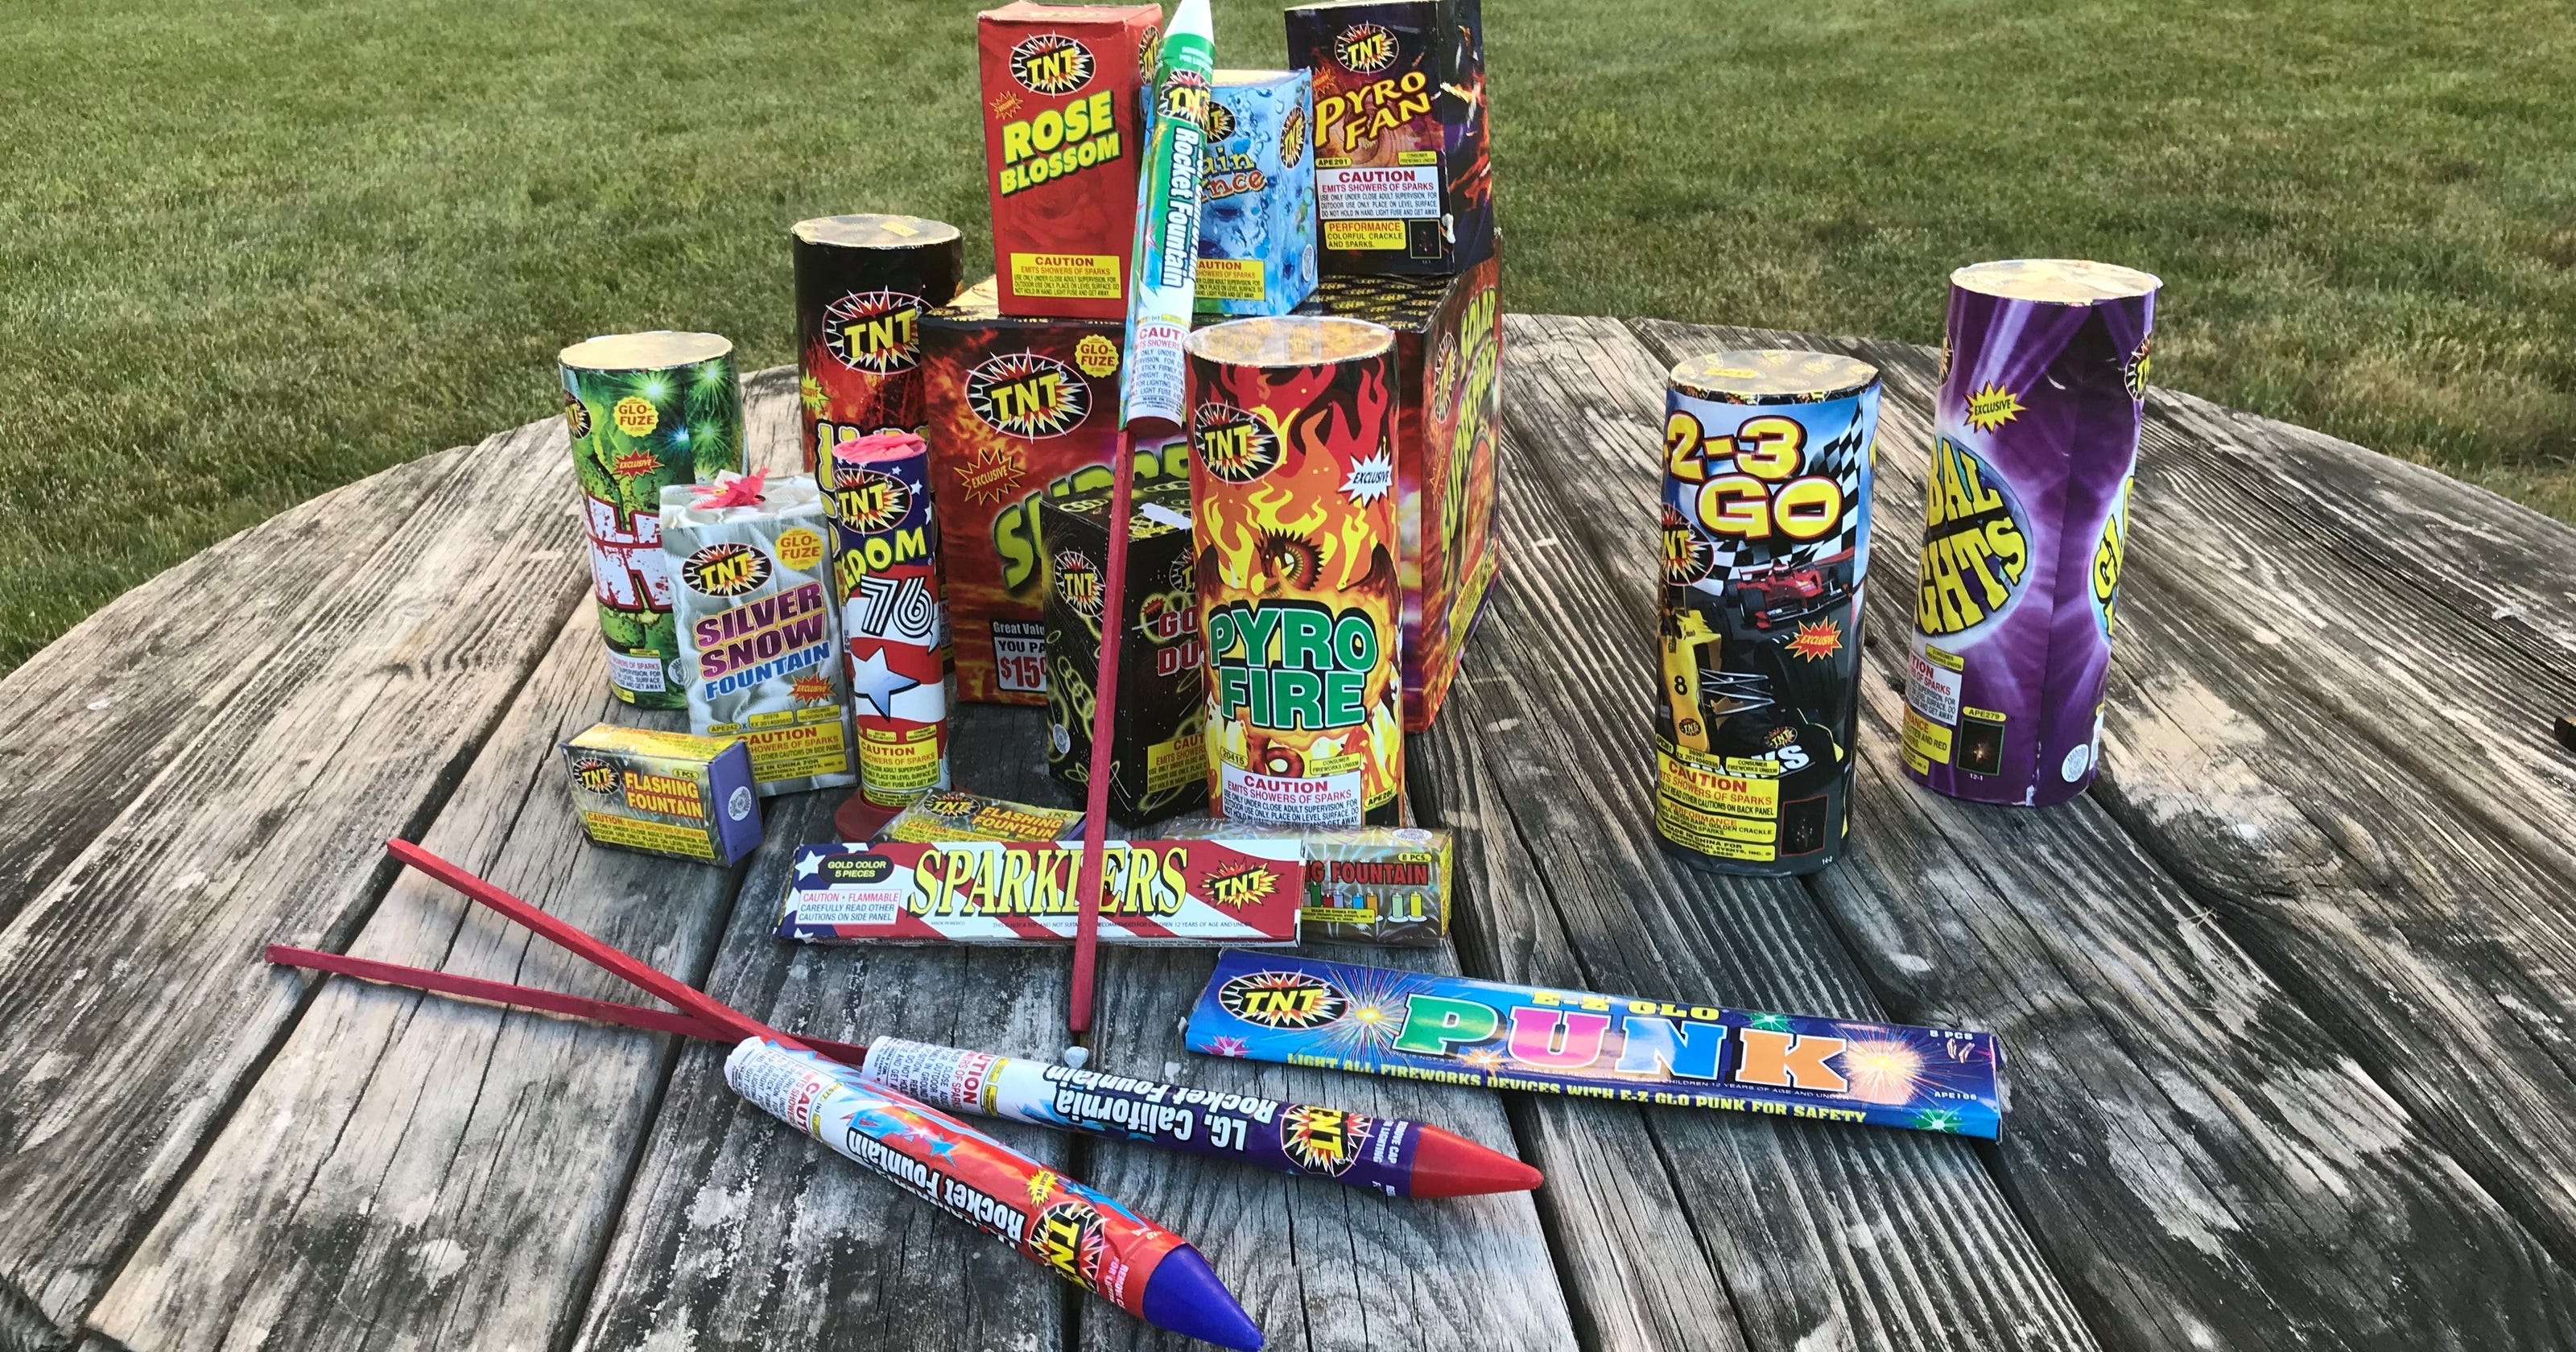 Fireworks are legal in NJ now, and they're everywhere